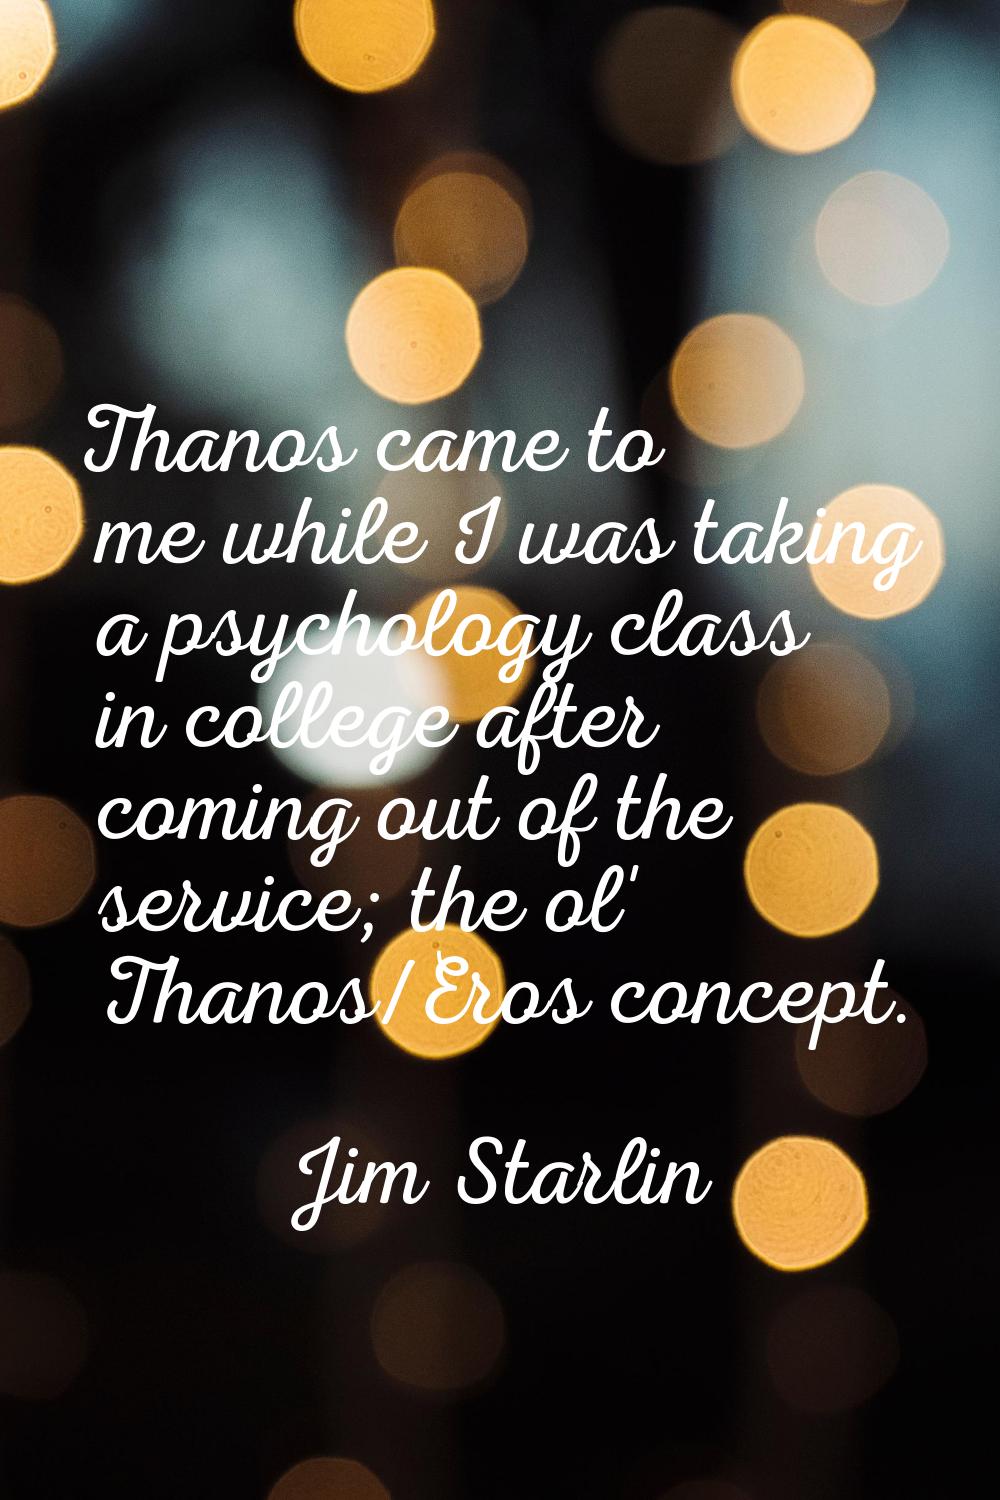 Thanos came to me while I was taking a psychology class in college after coming out of the service;